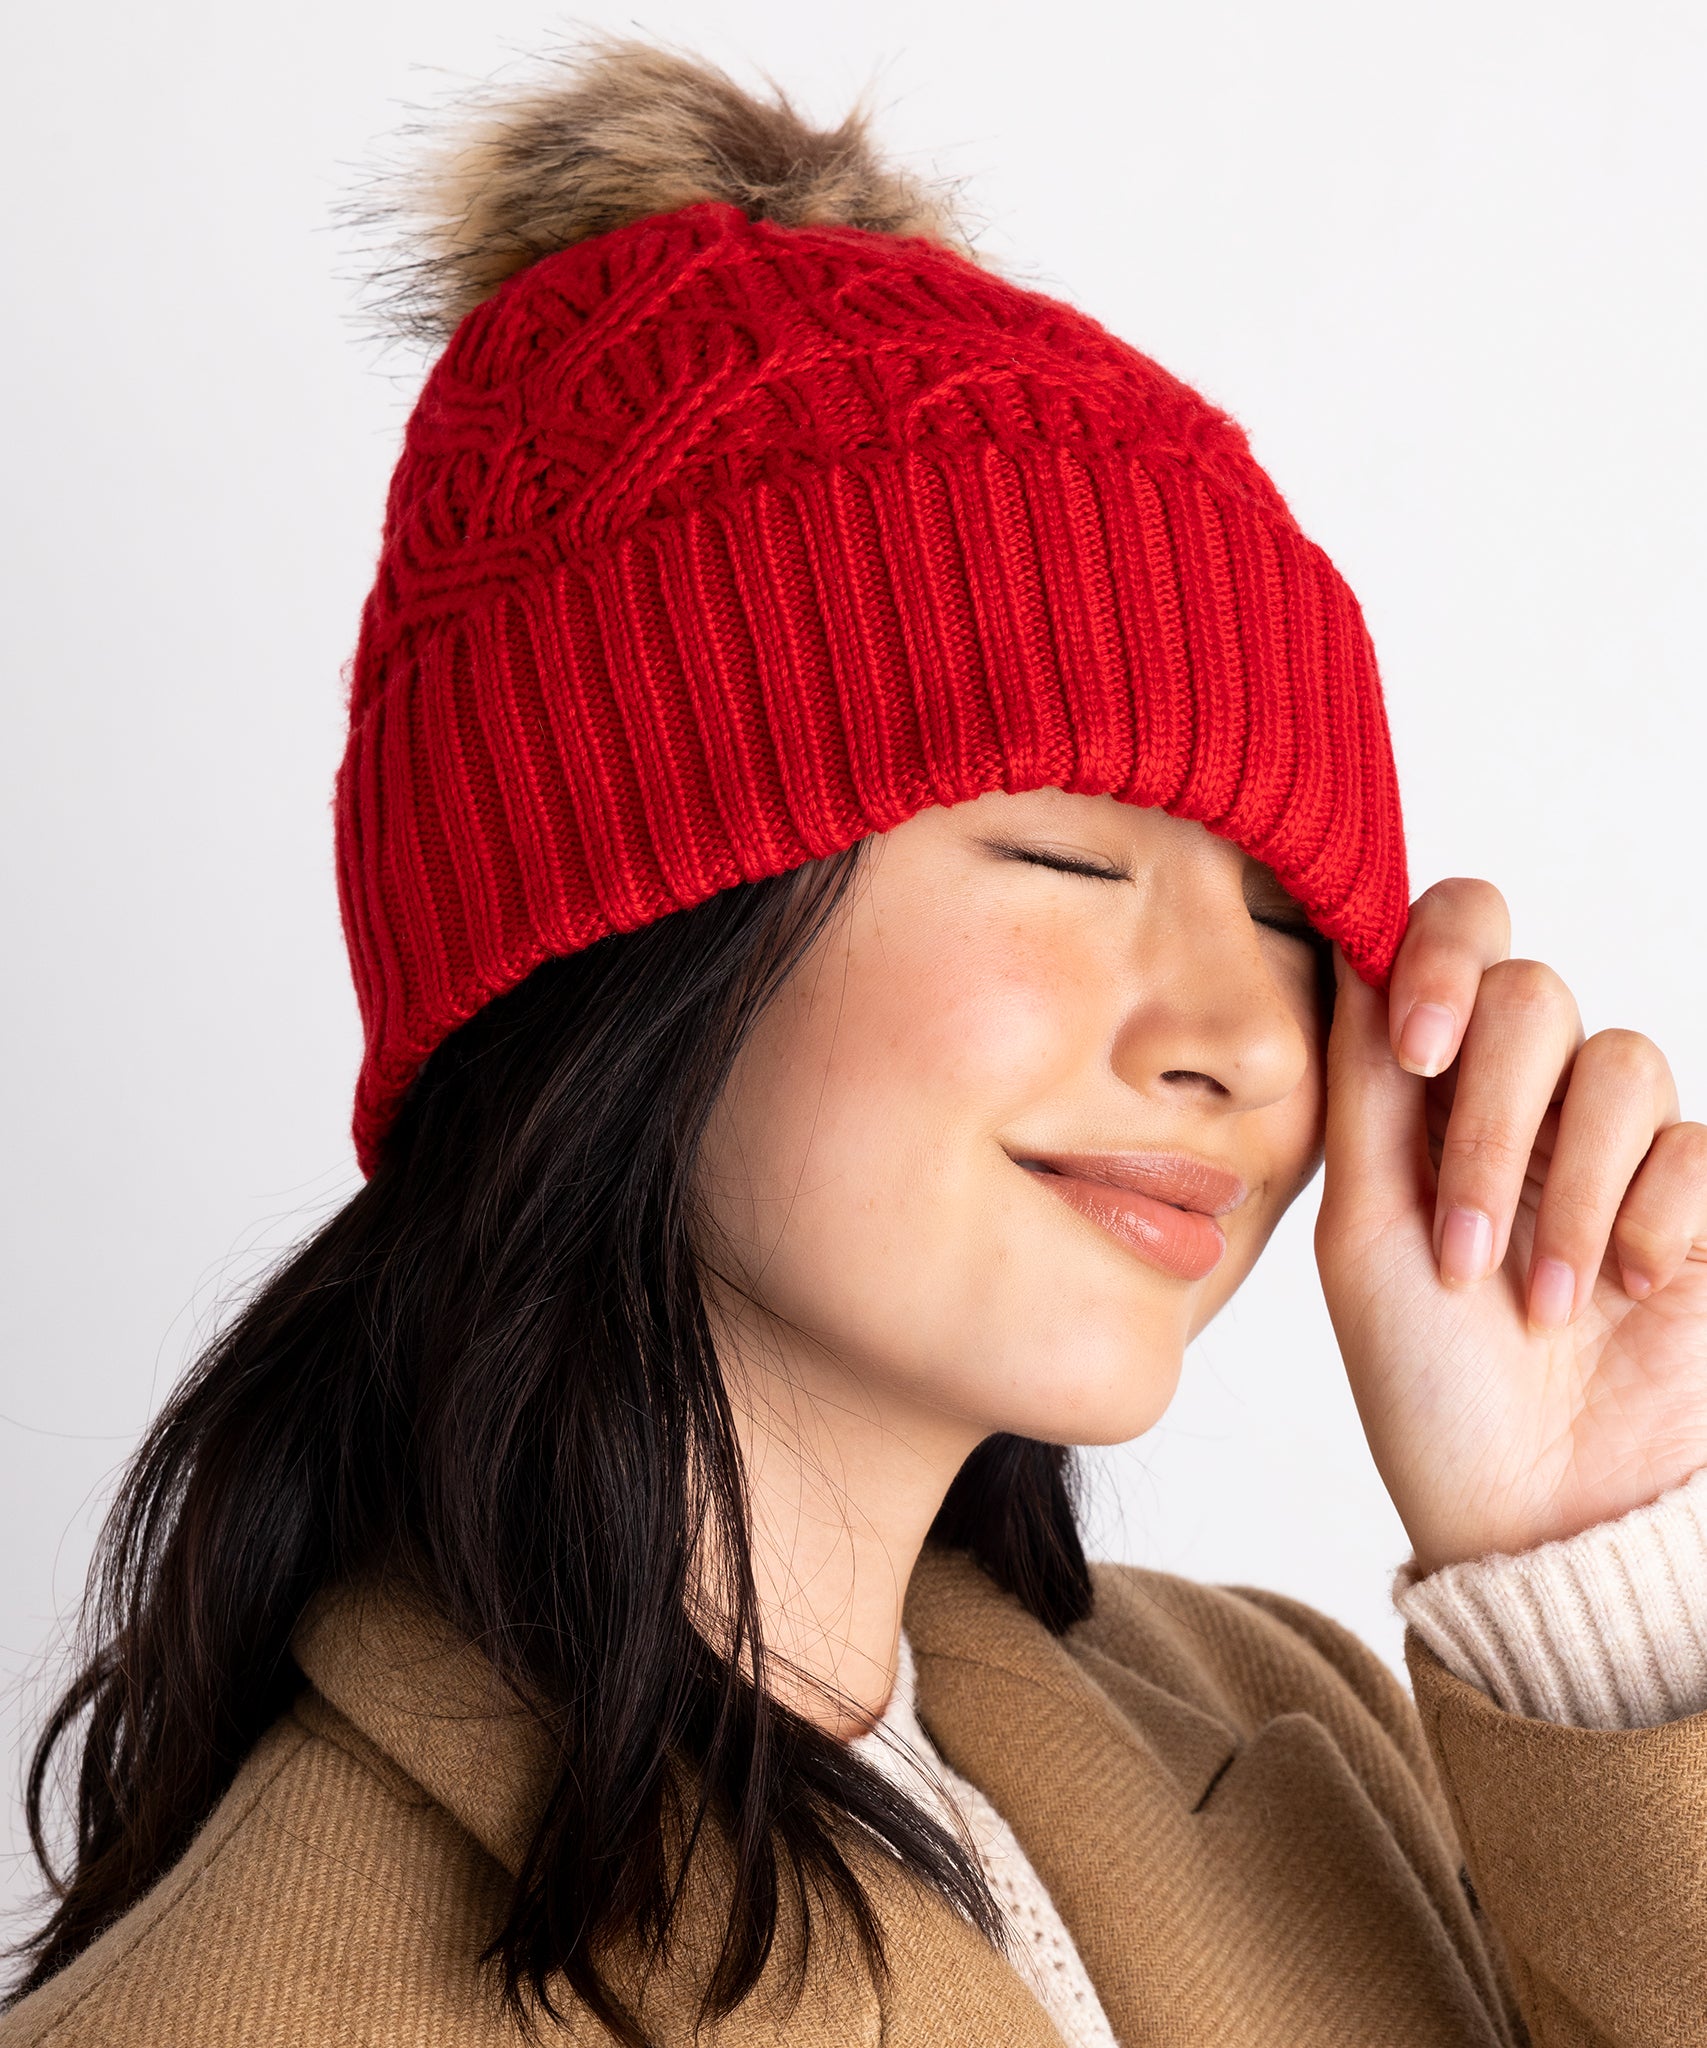 Echo Loopy Cable Pom Beanie Hat - Ivory